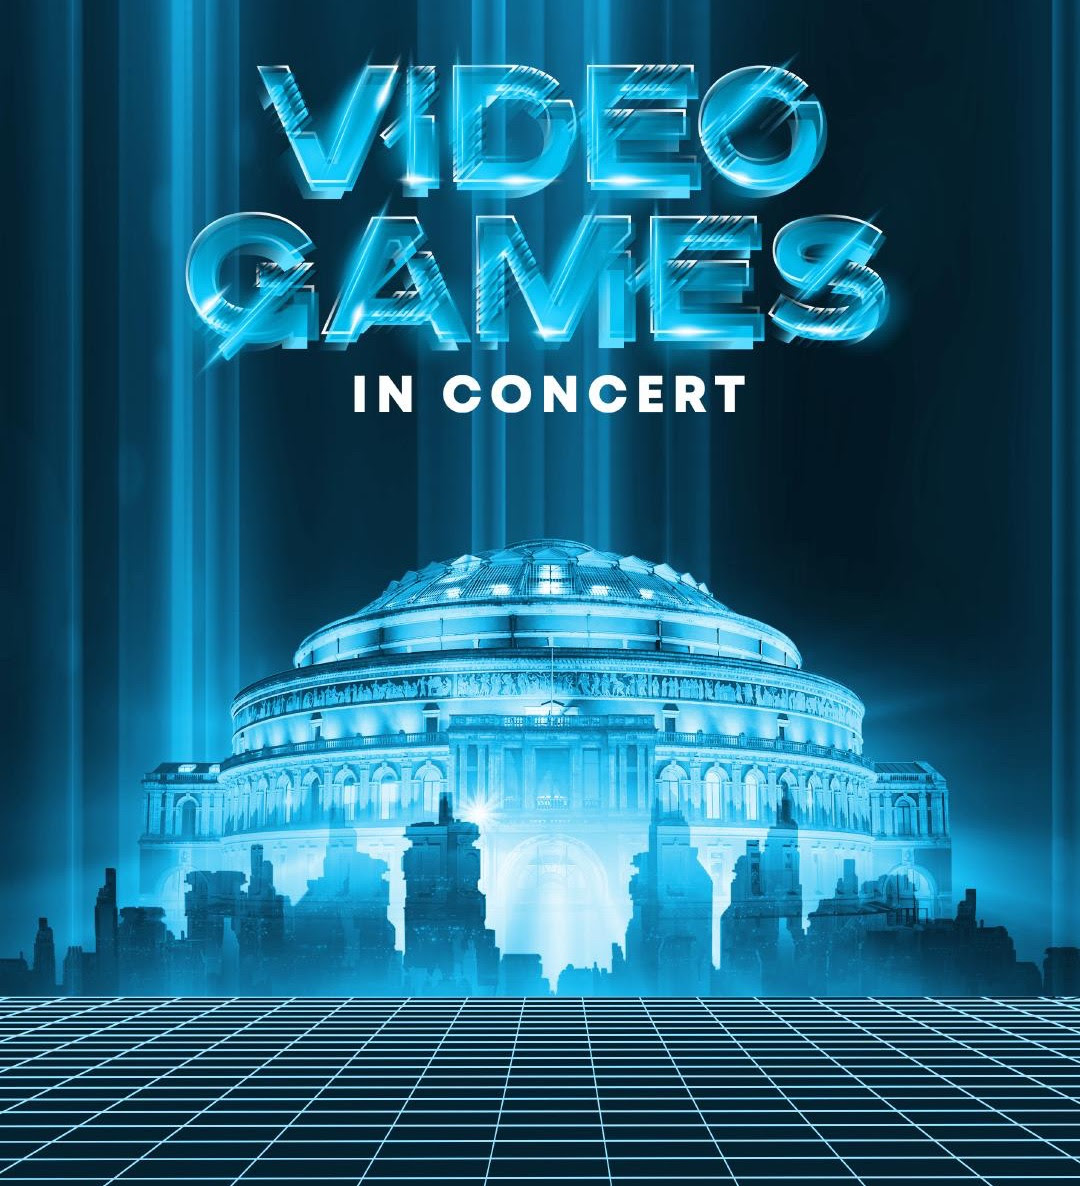 The key art for Video Games In Concert.